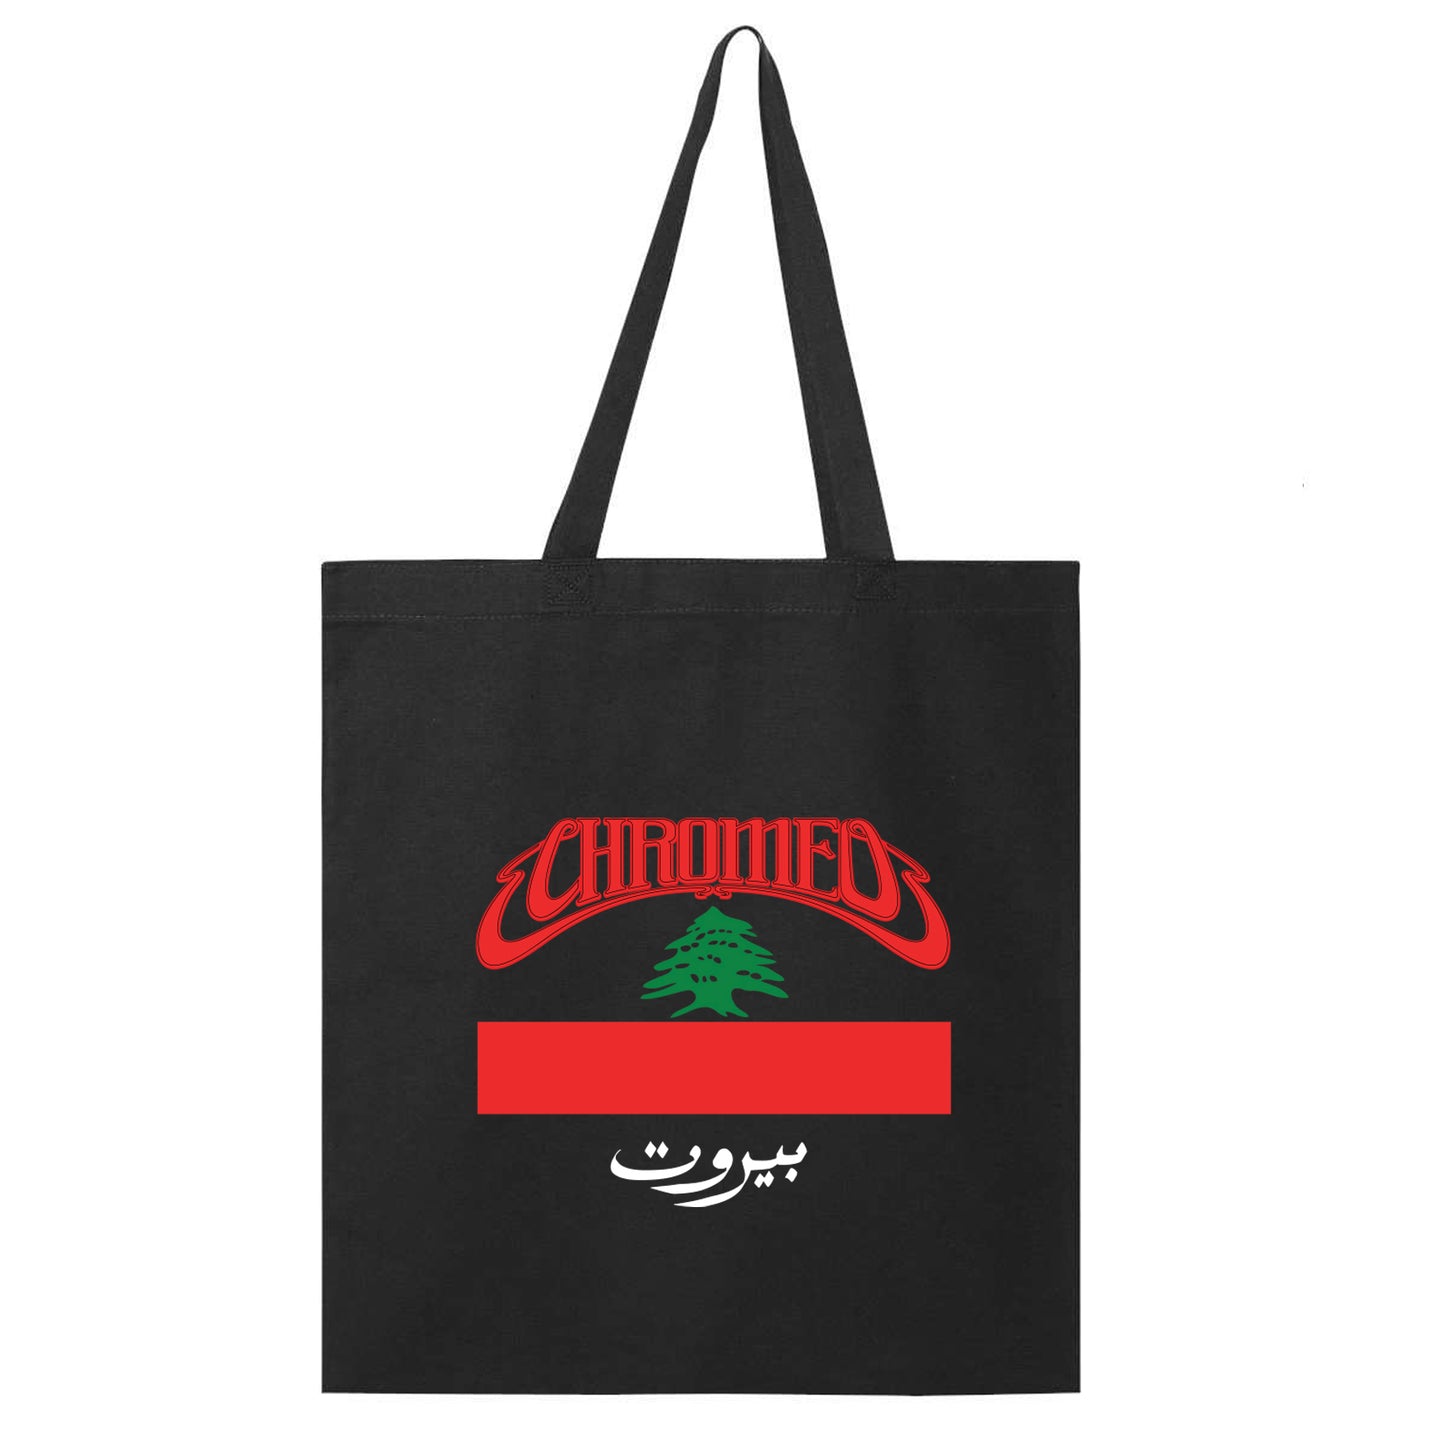 SOLIDARITY FOR BEIRUT TOTE BAG by @CHROMEO